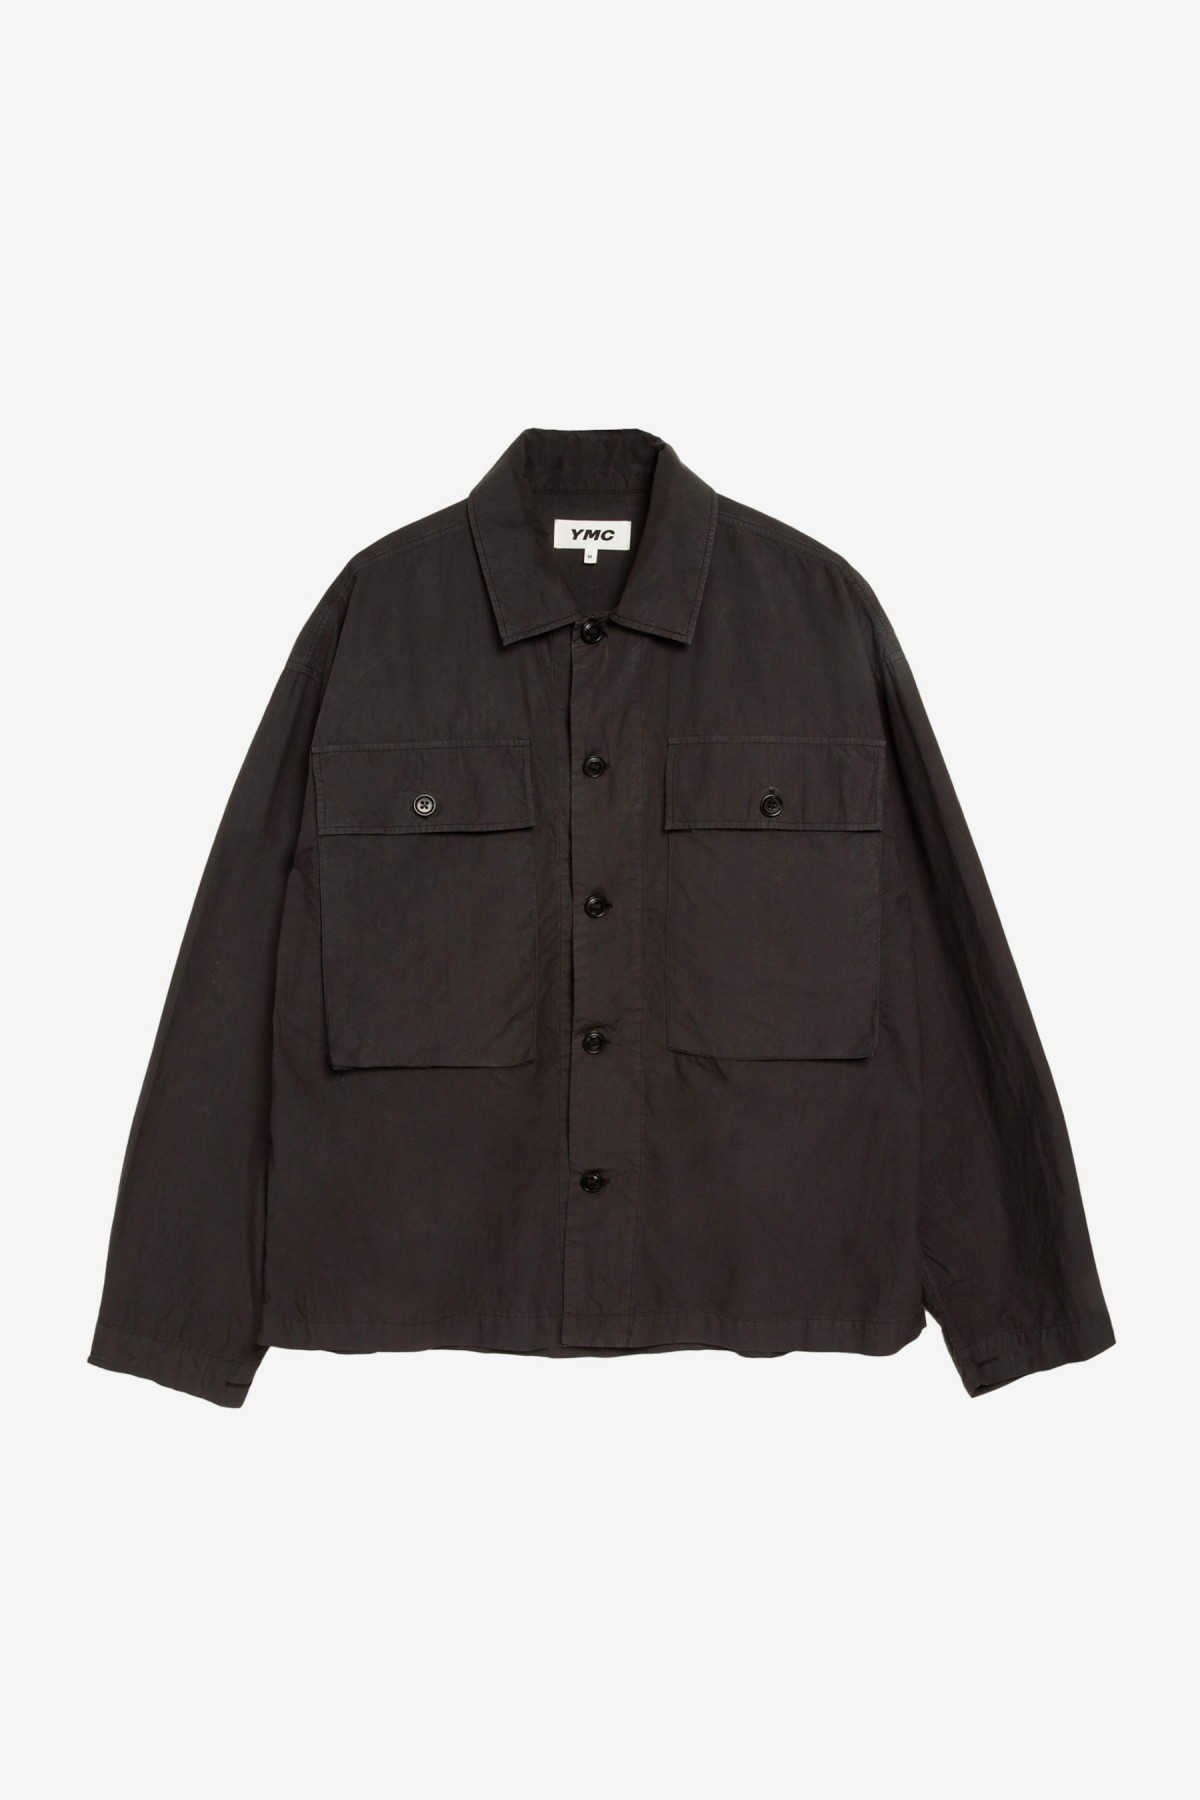 YMC You Must Create Military Shirt in Black